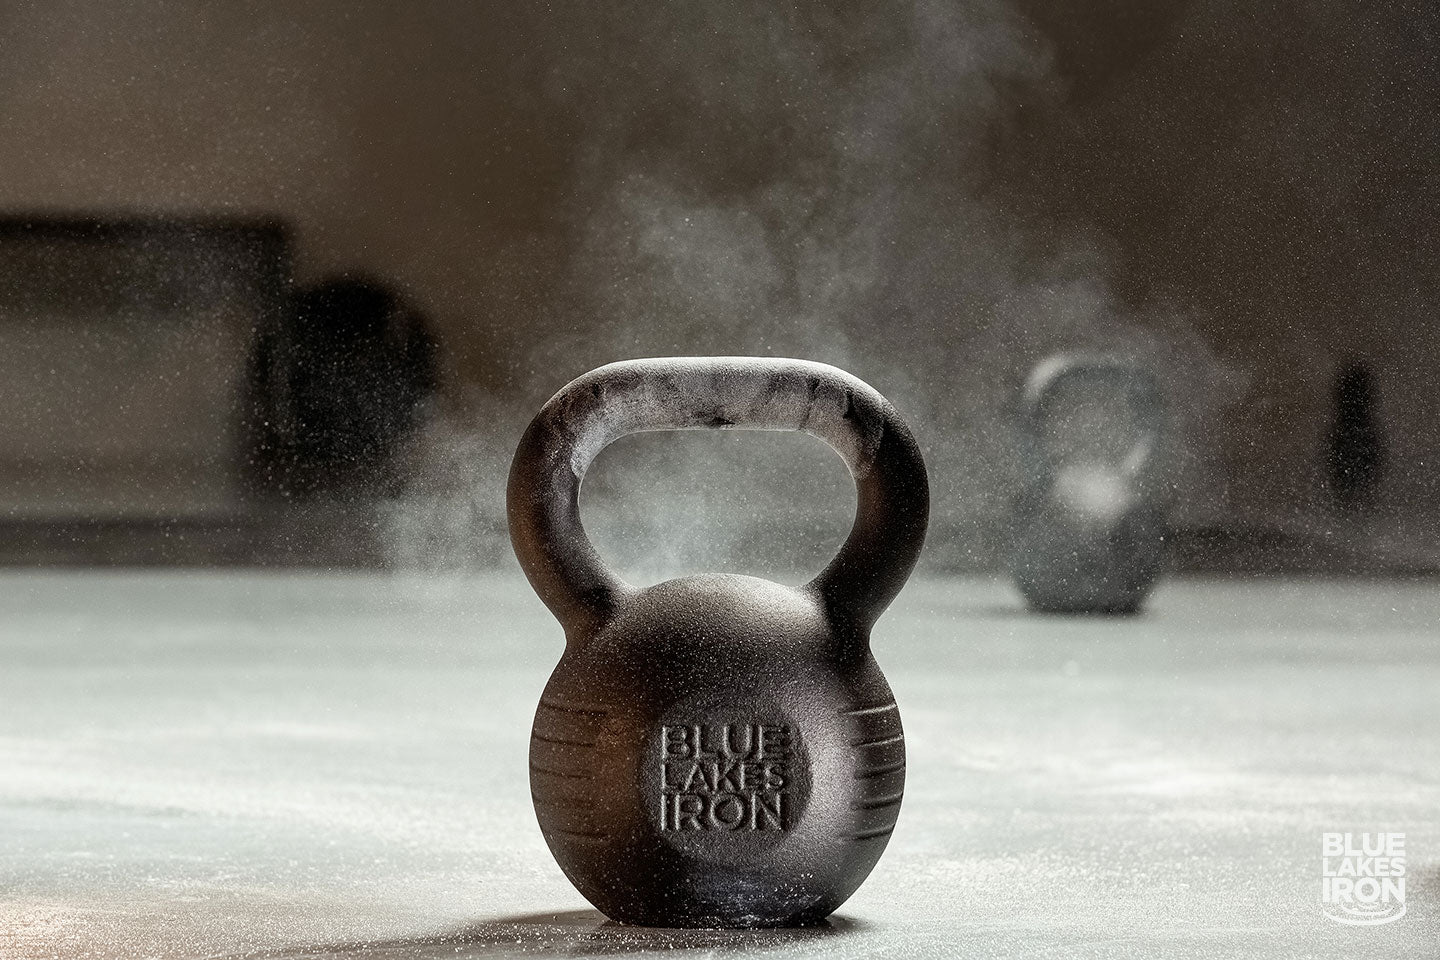 cast iron kettlebell made by Blue Lakes Iron sits on a gym floor. Weightlifting chalk dust is in the air.